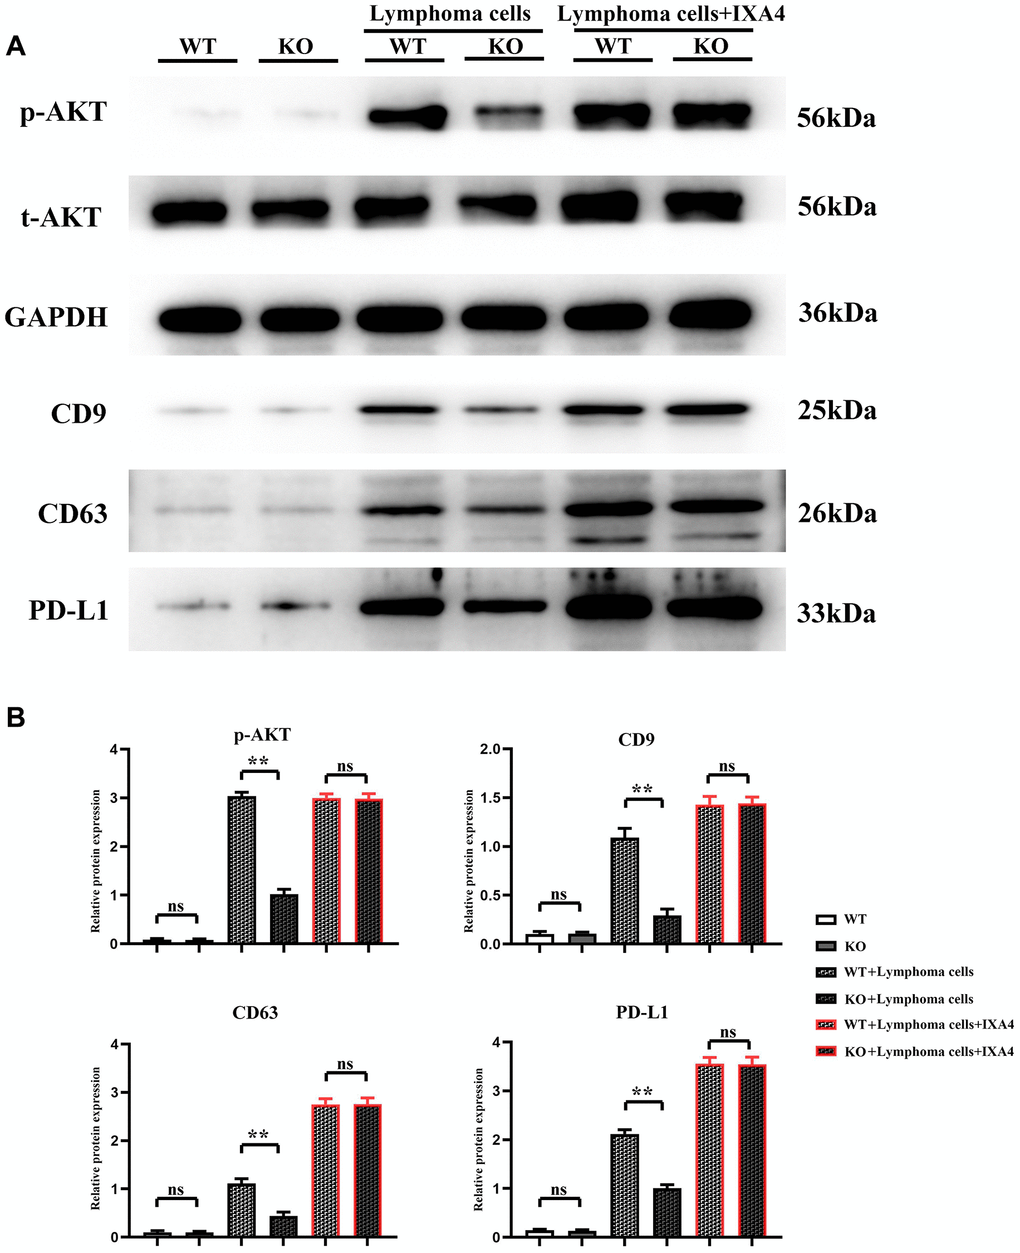 Western blotting of AKT signaling pathway-related proteins, exosome-associated proteins and PD-L1. (A) Protein bands of p-AKT, CD9, CD63 and PD-L1; (B) Relative protein expressions of p-AKT, CD9, CD63 and PD-L1. (WT + lymphoma cell + CAR-T group vs. KO + lymphoma cell + CAR-T group; WT + lymphoma cell + CAR-T + PD-L1 neutralizing antibody group vs. KO + lymphoma cell + CAR-T + PD-L1 neutralizing antibody group; **P nsP > 0.05; N = 3).